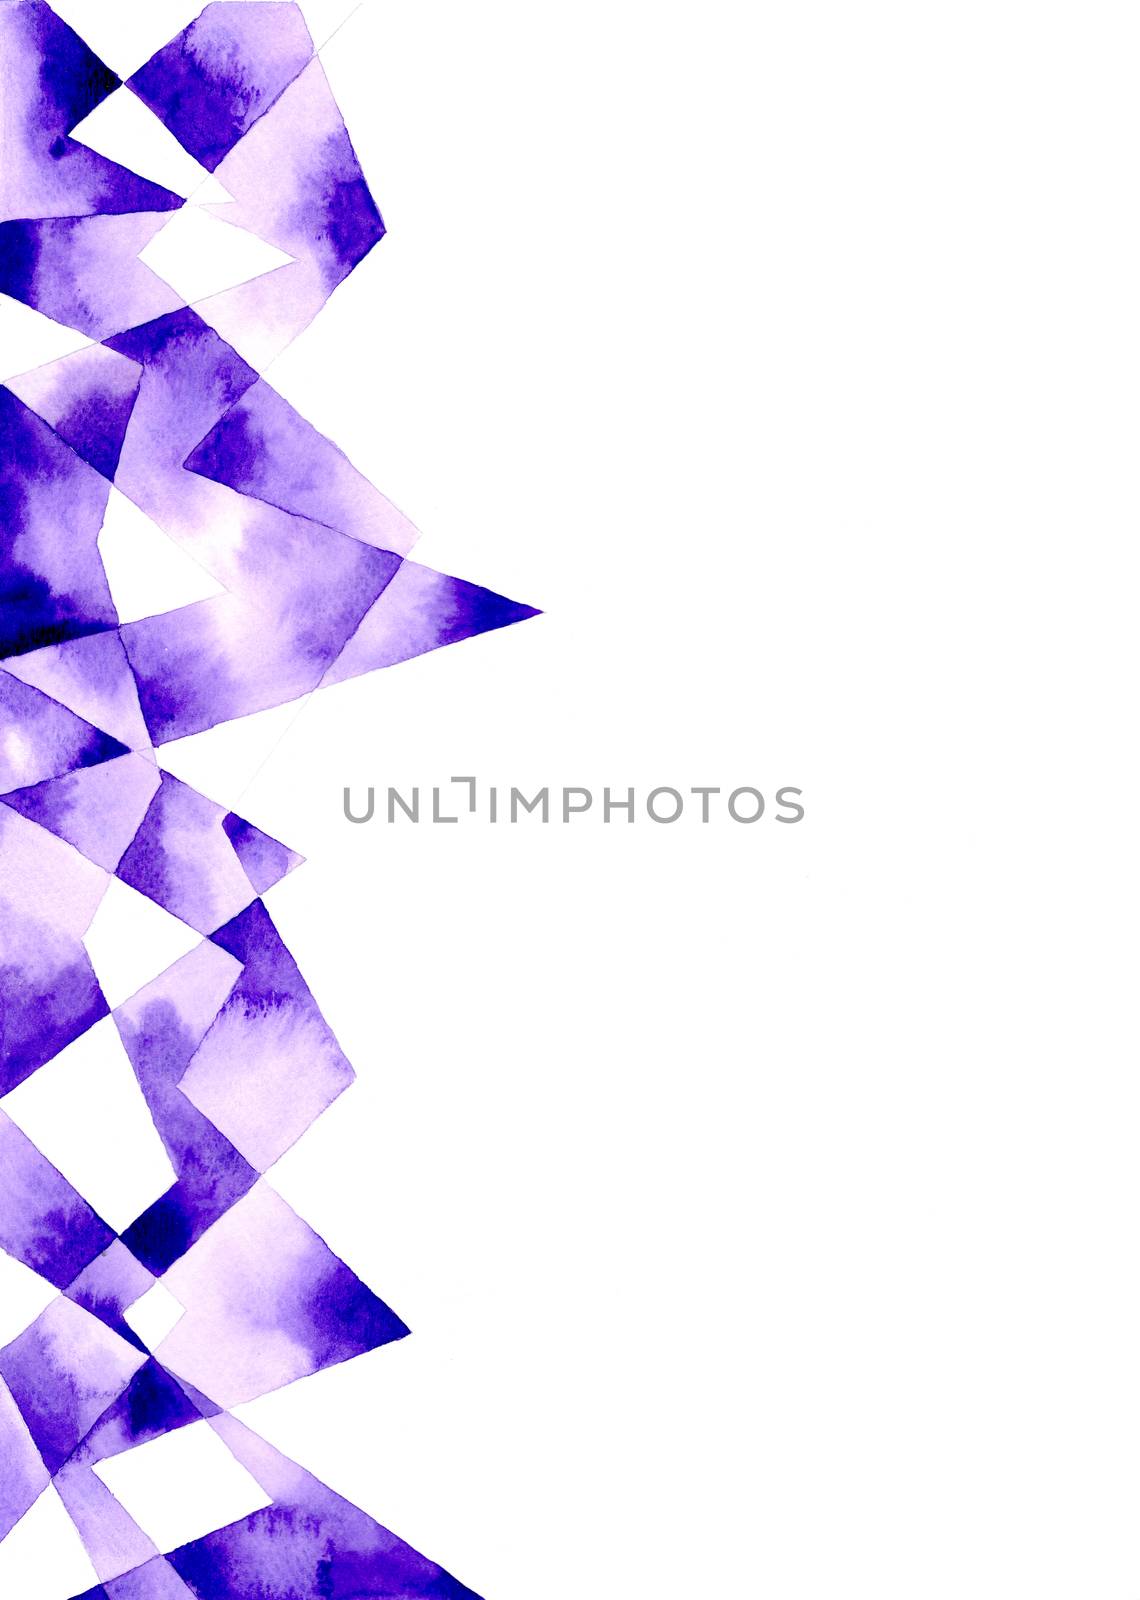 Purple polygon abstract frame on white background. Template for style design. Watercolor hand painting illustration.